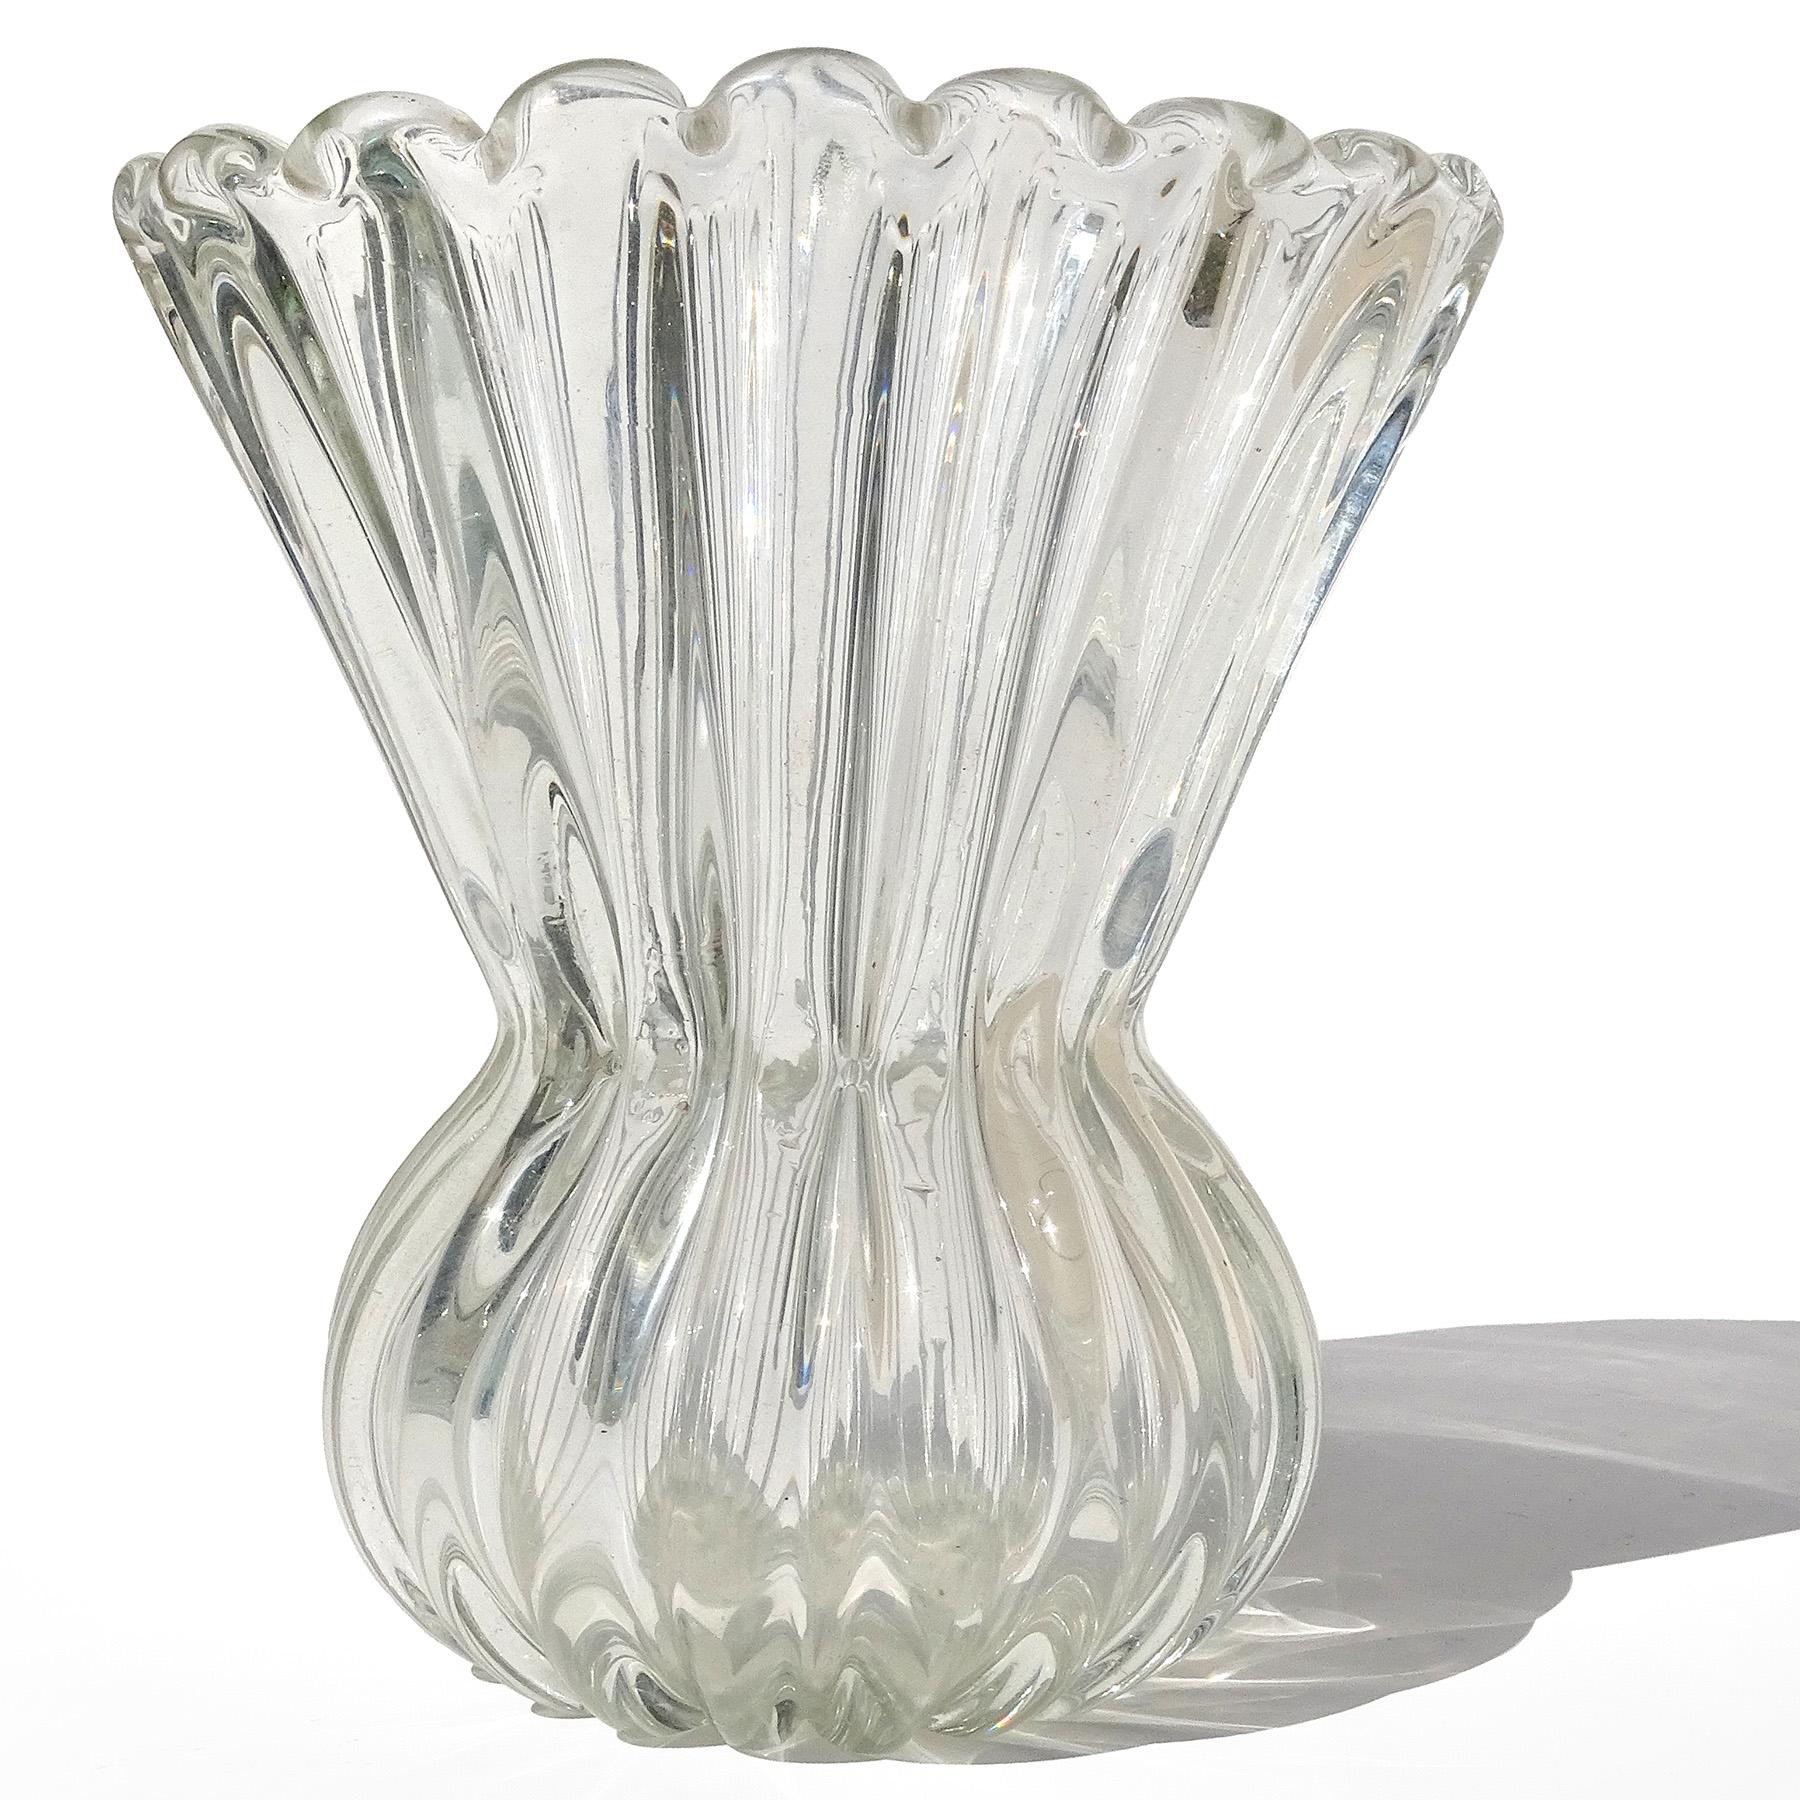 Beautiful vintage Murano hand blown crystal clear Italian art glass flower vase. Created in the manner of Seguso Vetri d'Arte and Archimede Seguso. The vase has a cinched waist and flared out fan shape rim. It is made of thick glass with a ribbed